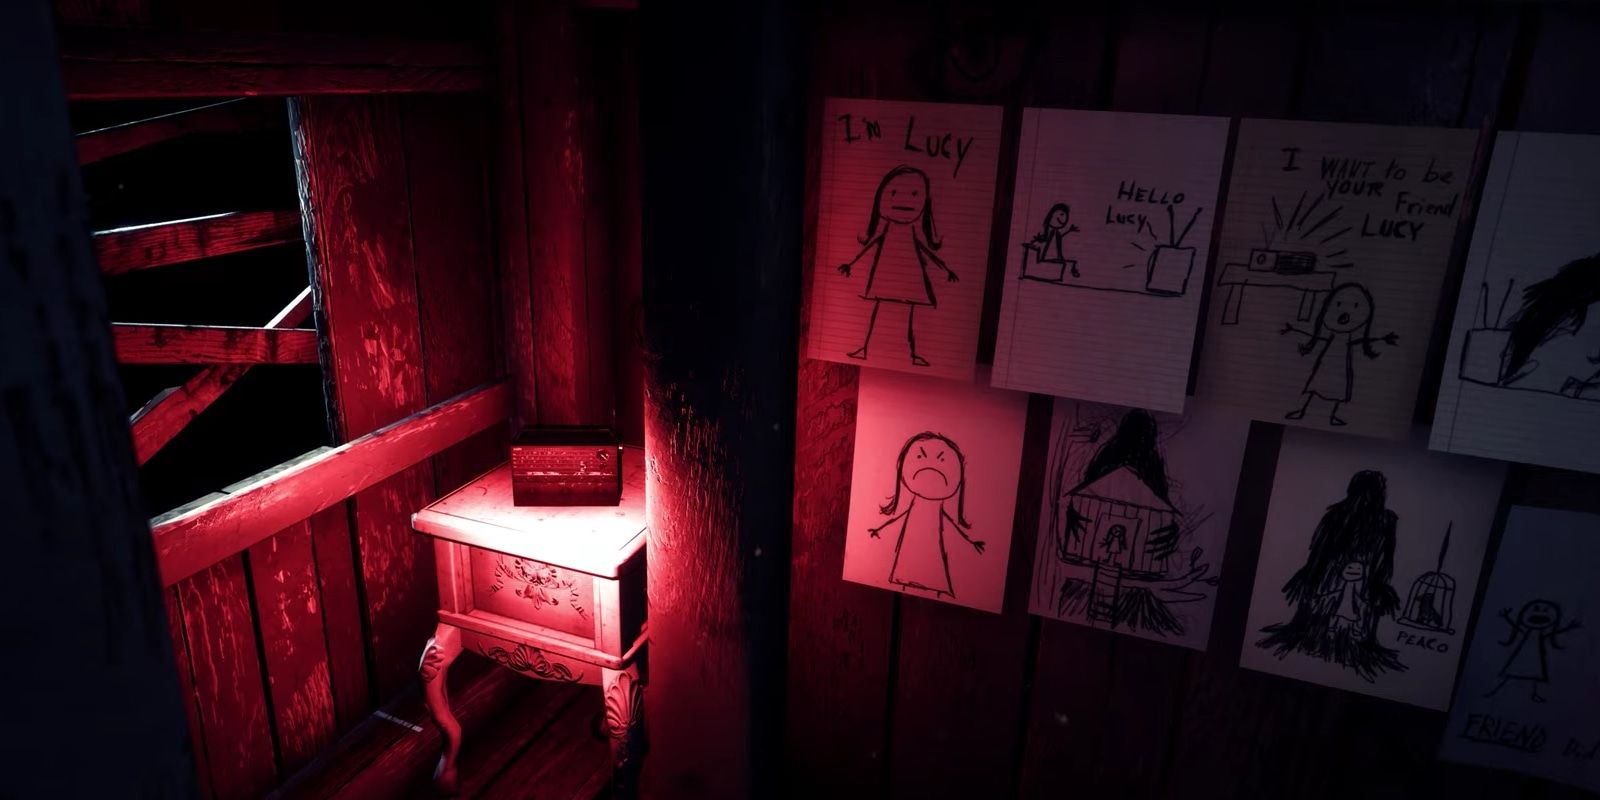 A red lit treehouse interior with disturbing drawings